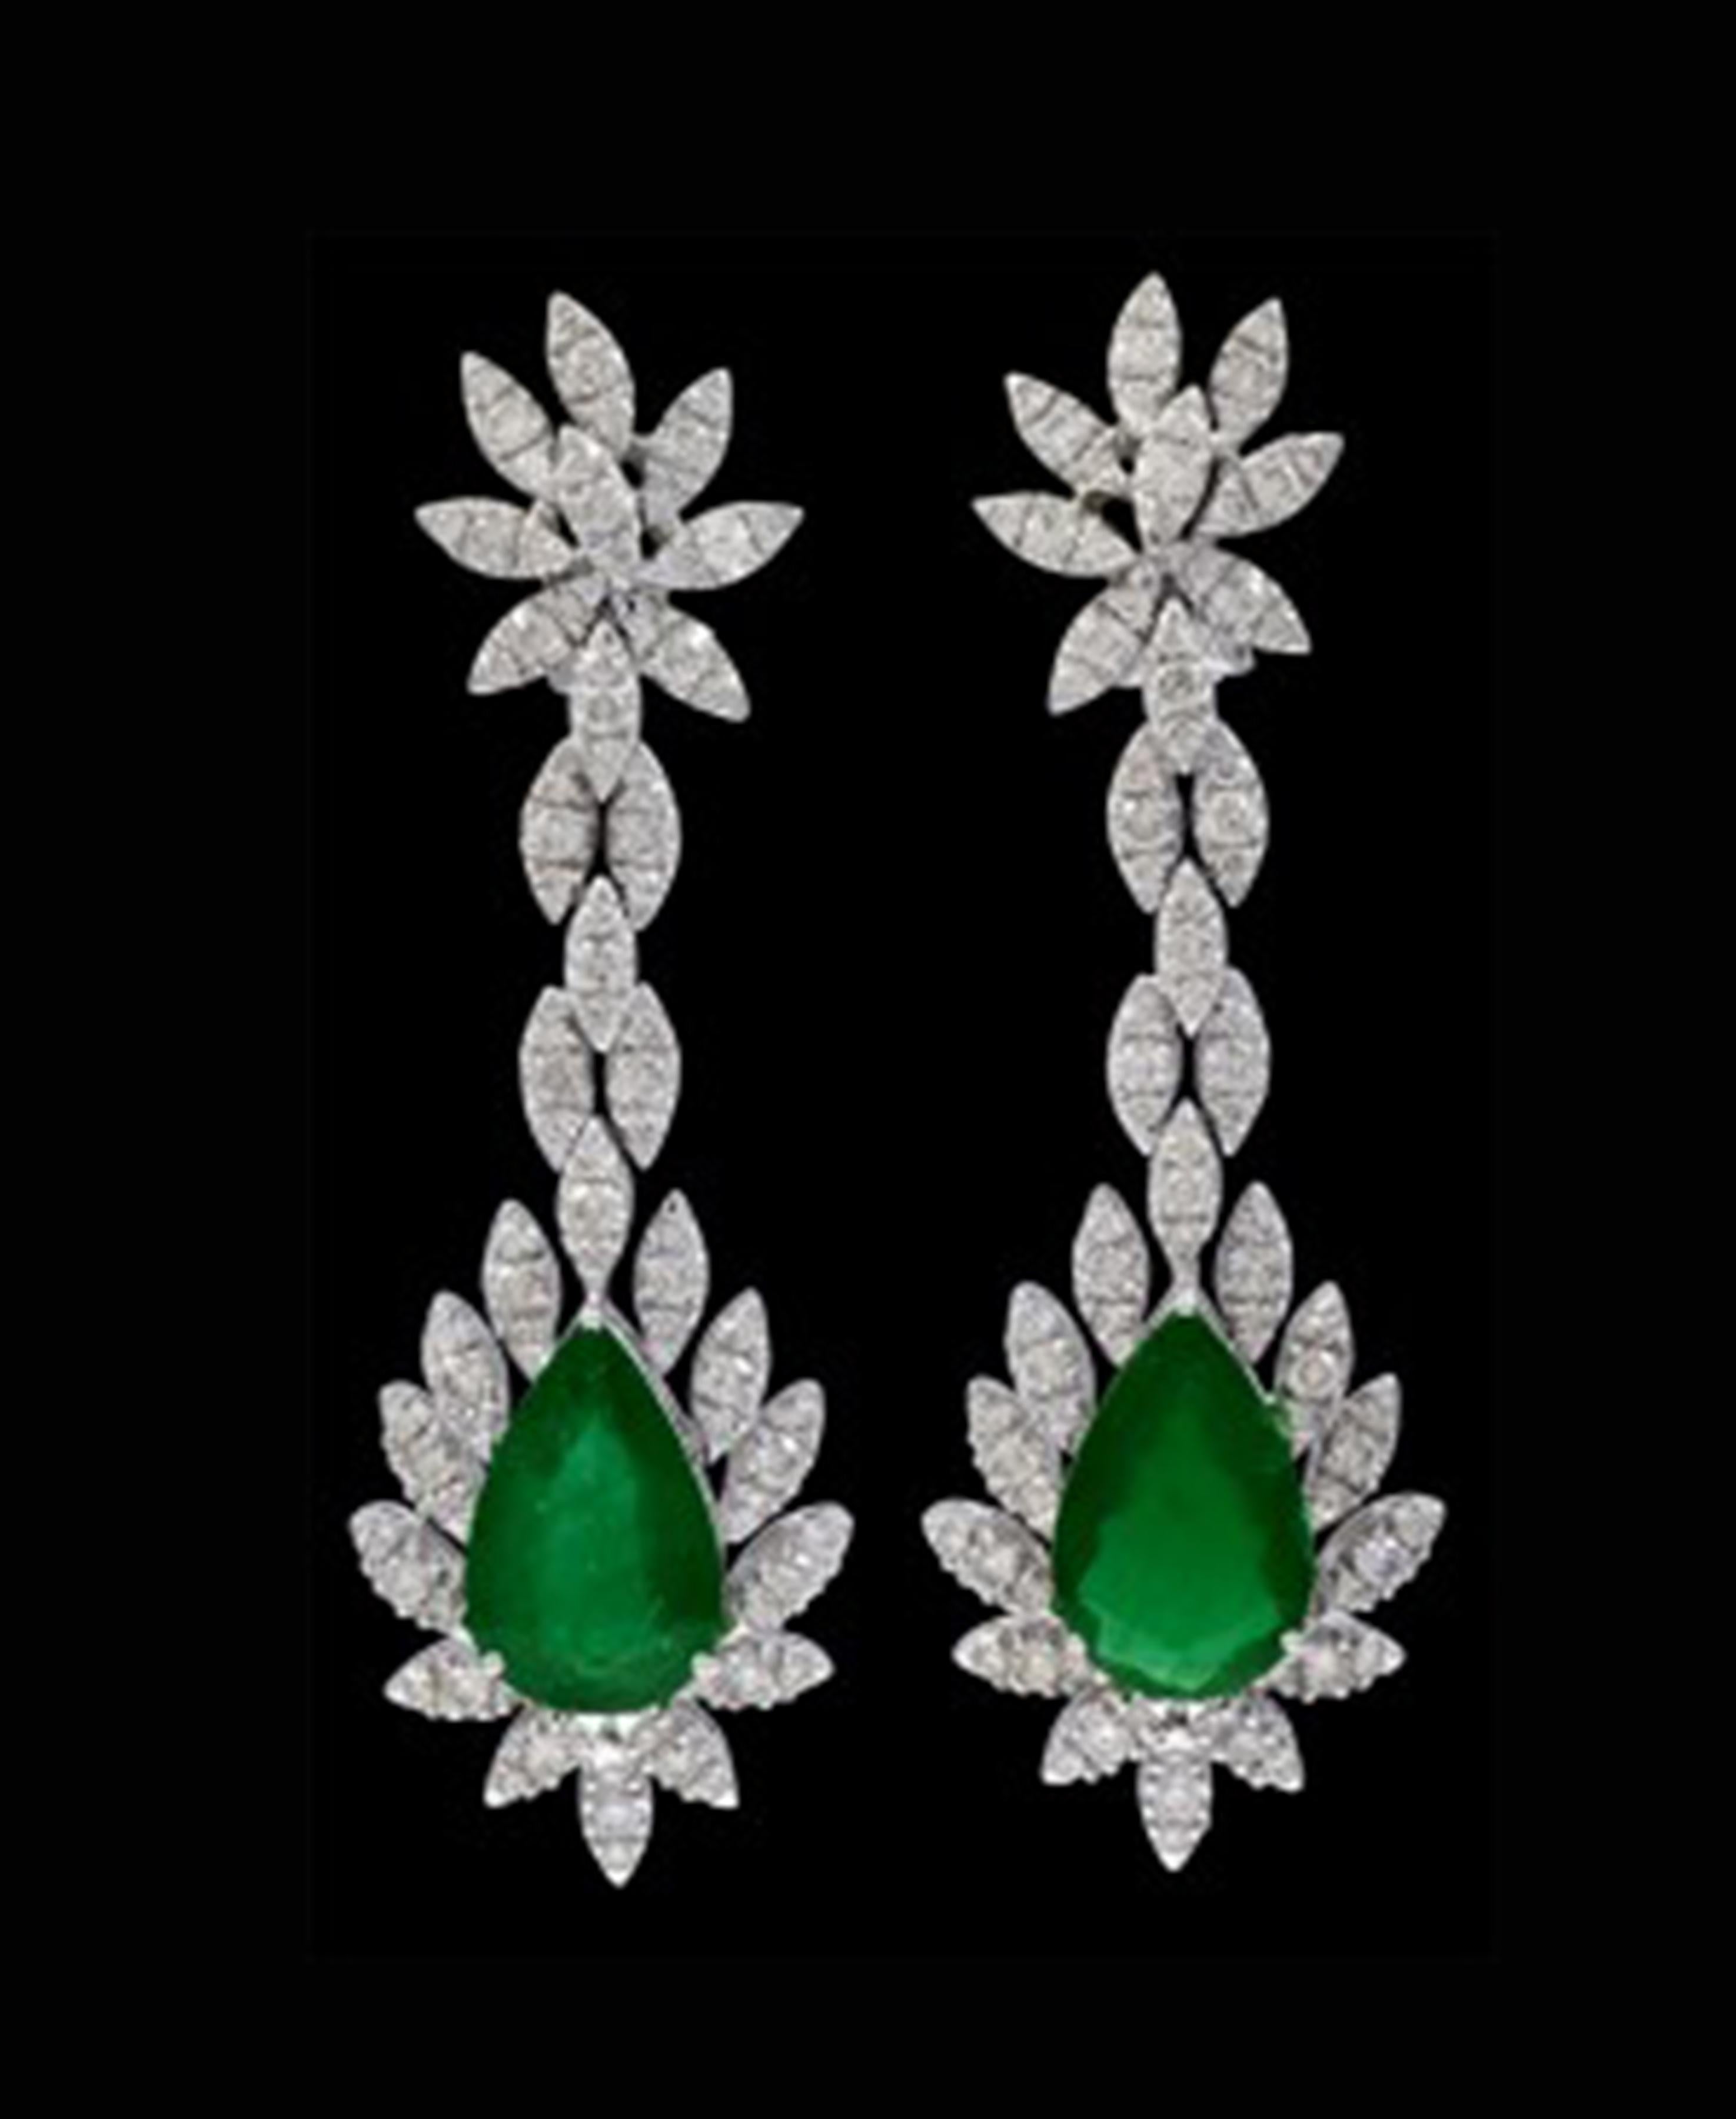 15 Carat  Pear Shape Emerald Diamond  Hanging Earrings 18 K White Gold
This exquisite pair of earrings are beautifully crafted with 18 karat White gold  weighing    
 24 grams
Two fine Natural  Pear  Cut Emeralds weighing approximately 15 carats